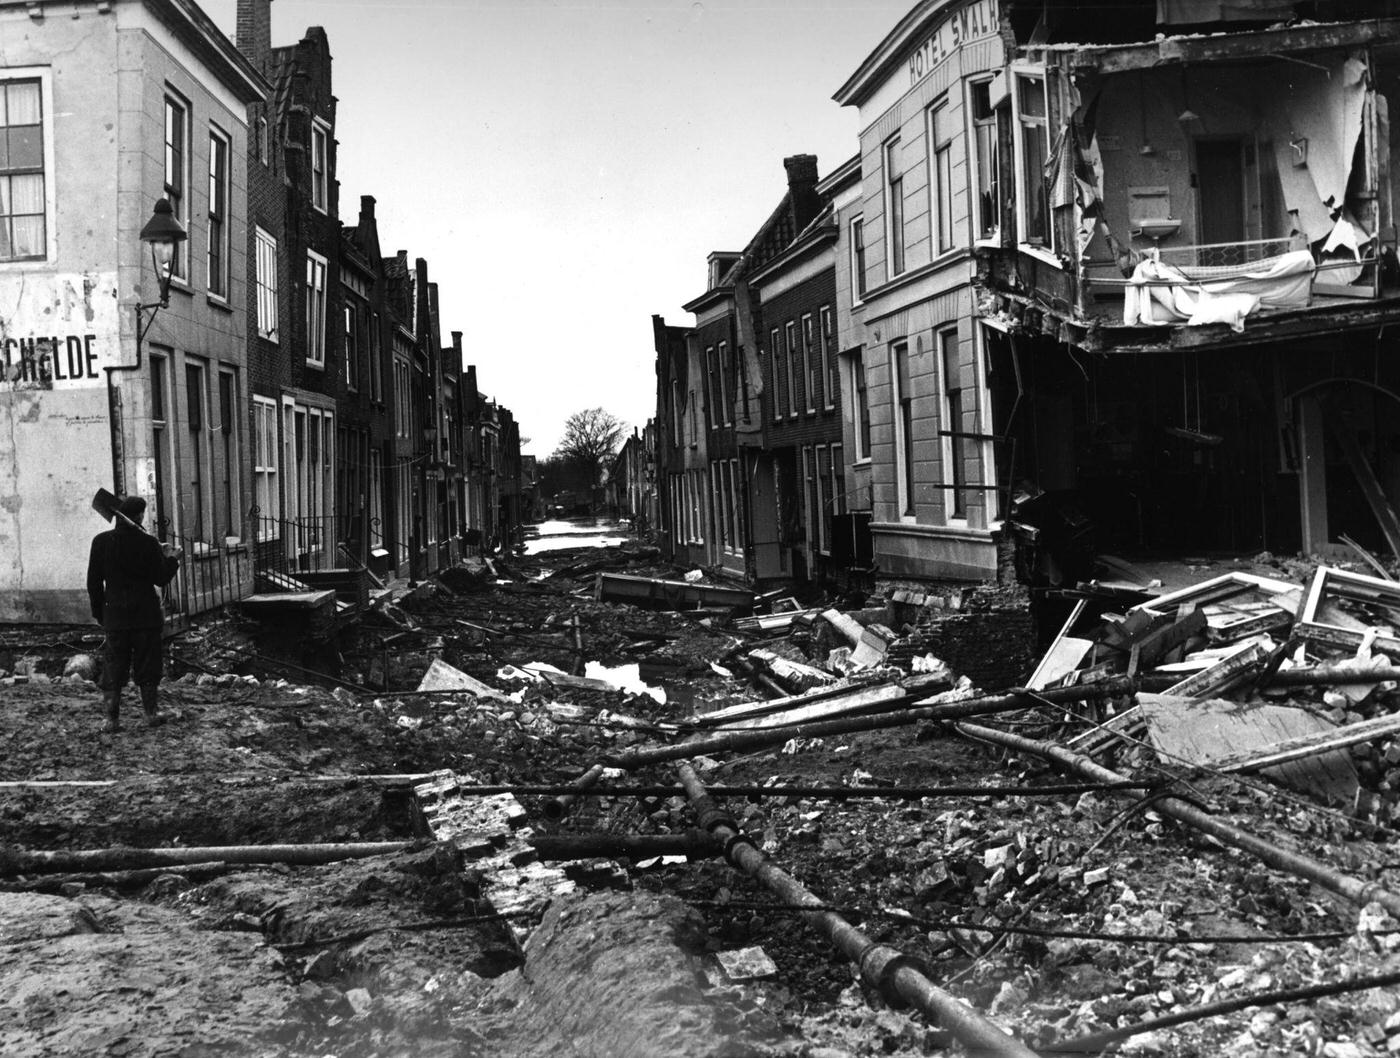 A town destroyed by a flood in the Netherlands, February 1953.